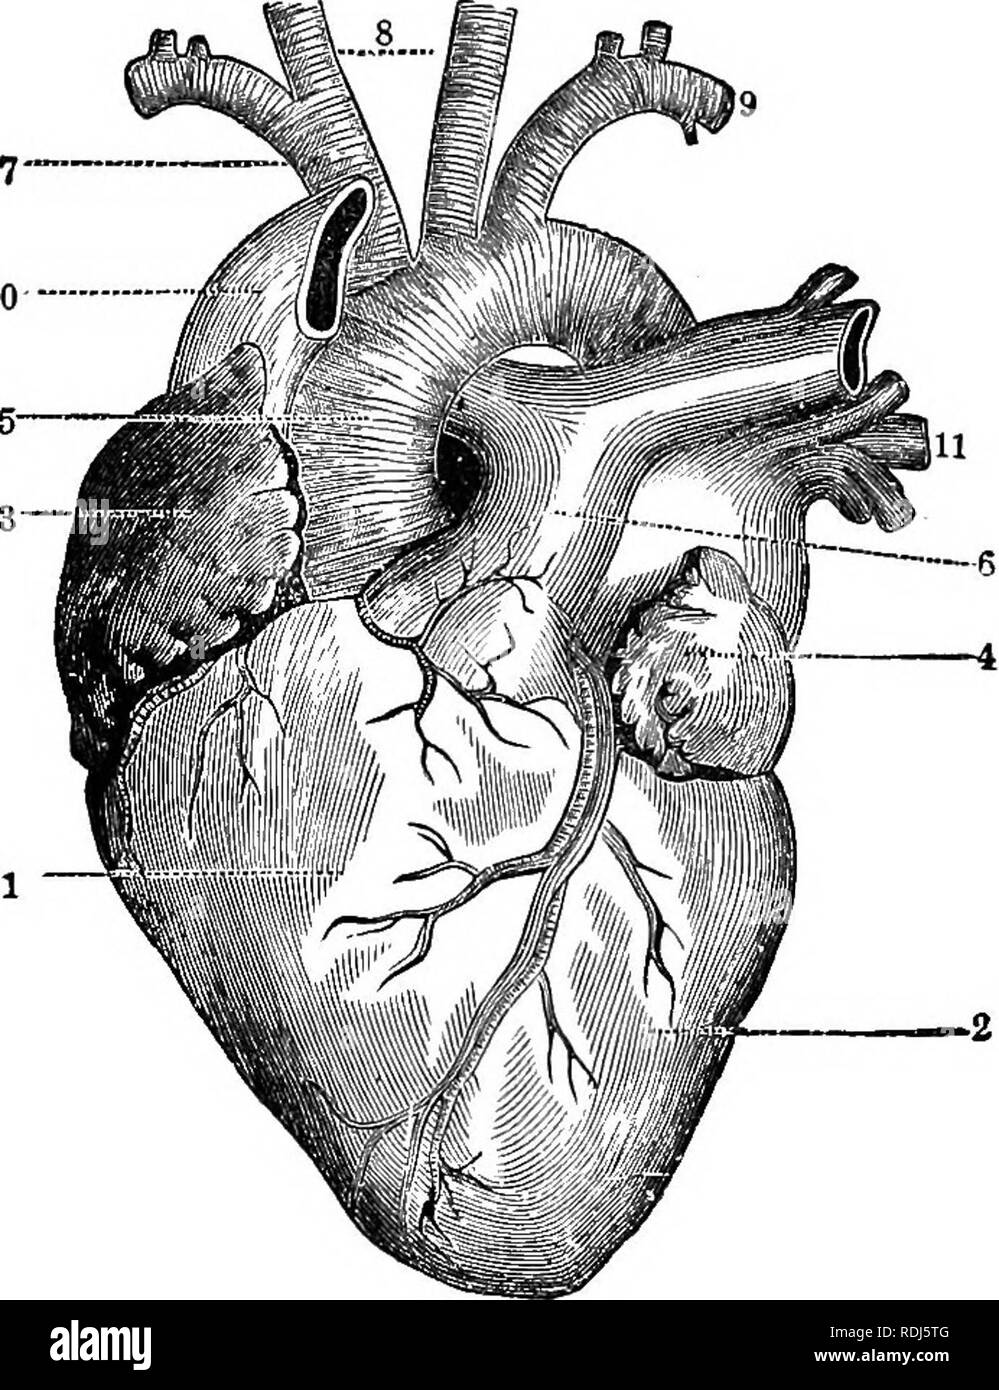 . A text-book in general physiology and anatomy. Physiology, Comparative; Anatomy. EXTERNAL ANATOMY OF THE HEART 183 10— ventricles. In the partition between the right auricle and right ventricle is an opening guarded by a three-cornered valve known as the tricuspid valve. The left auricle and left ventricle communicate by a similar opening, and the valve which guards this opening is called the mitral valve from its resemb- lance to a miter. The auricles re- ceive the blood from' veins, and this blood passes from the auricles into the ventri- cles through the, valves. The ven- tricles in turn, Stock Photo